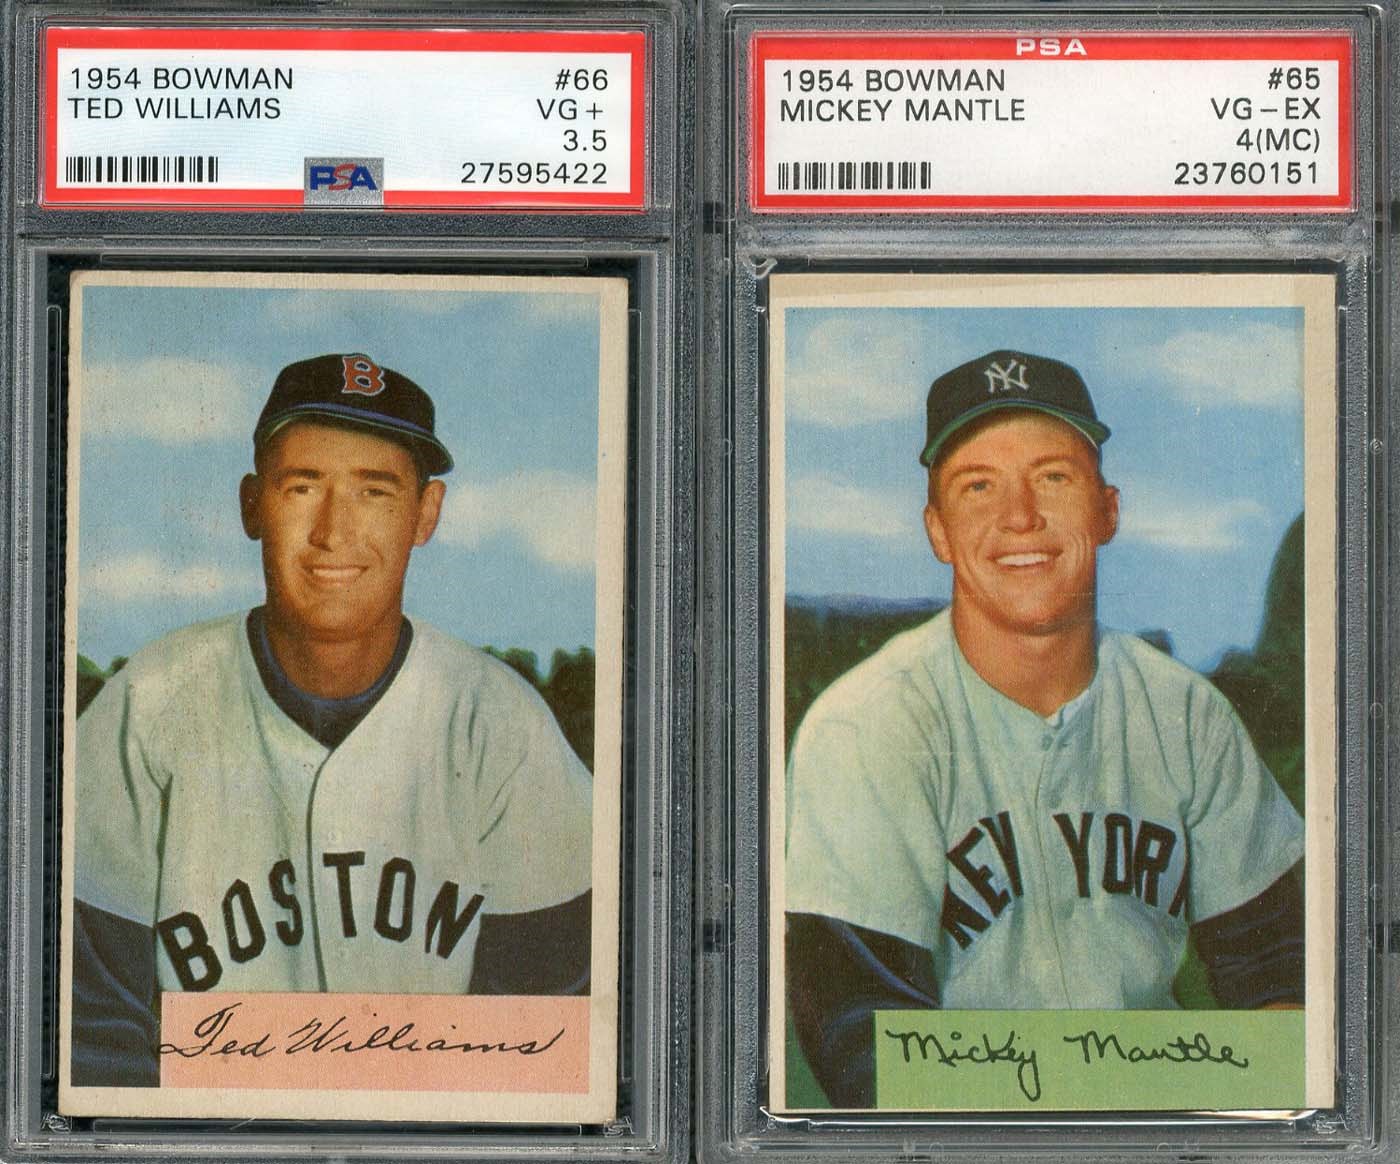 - 1954 Bowman Complete Set of 225 Cards including PSA Graded #66 Ted Williams